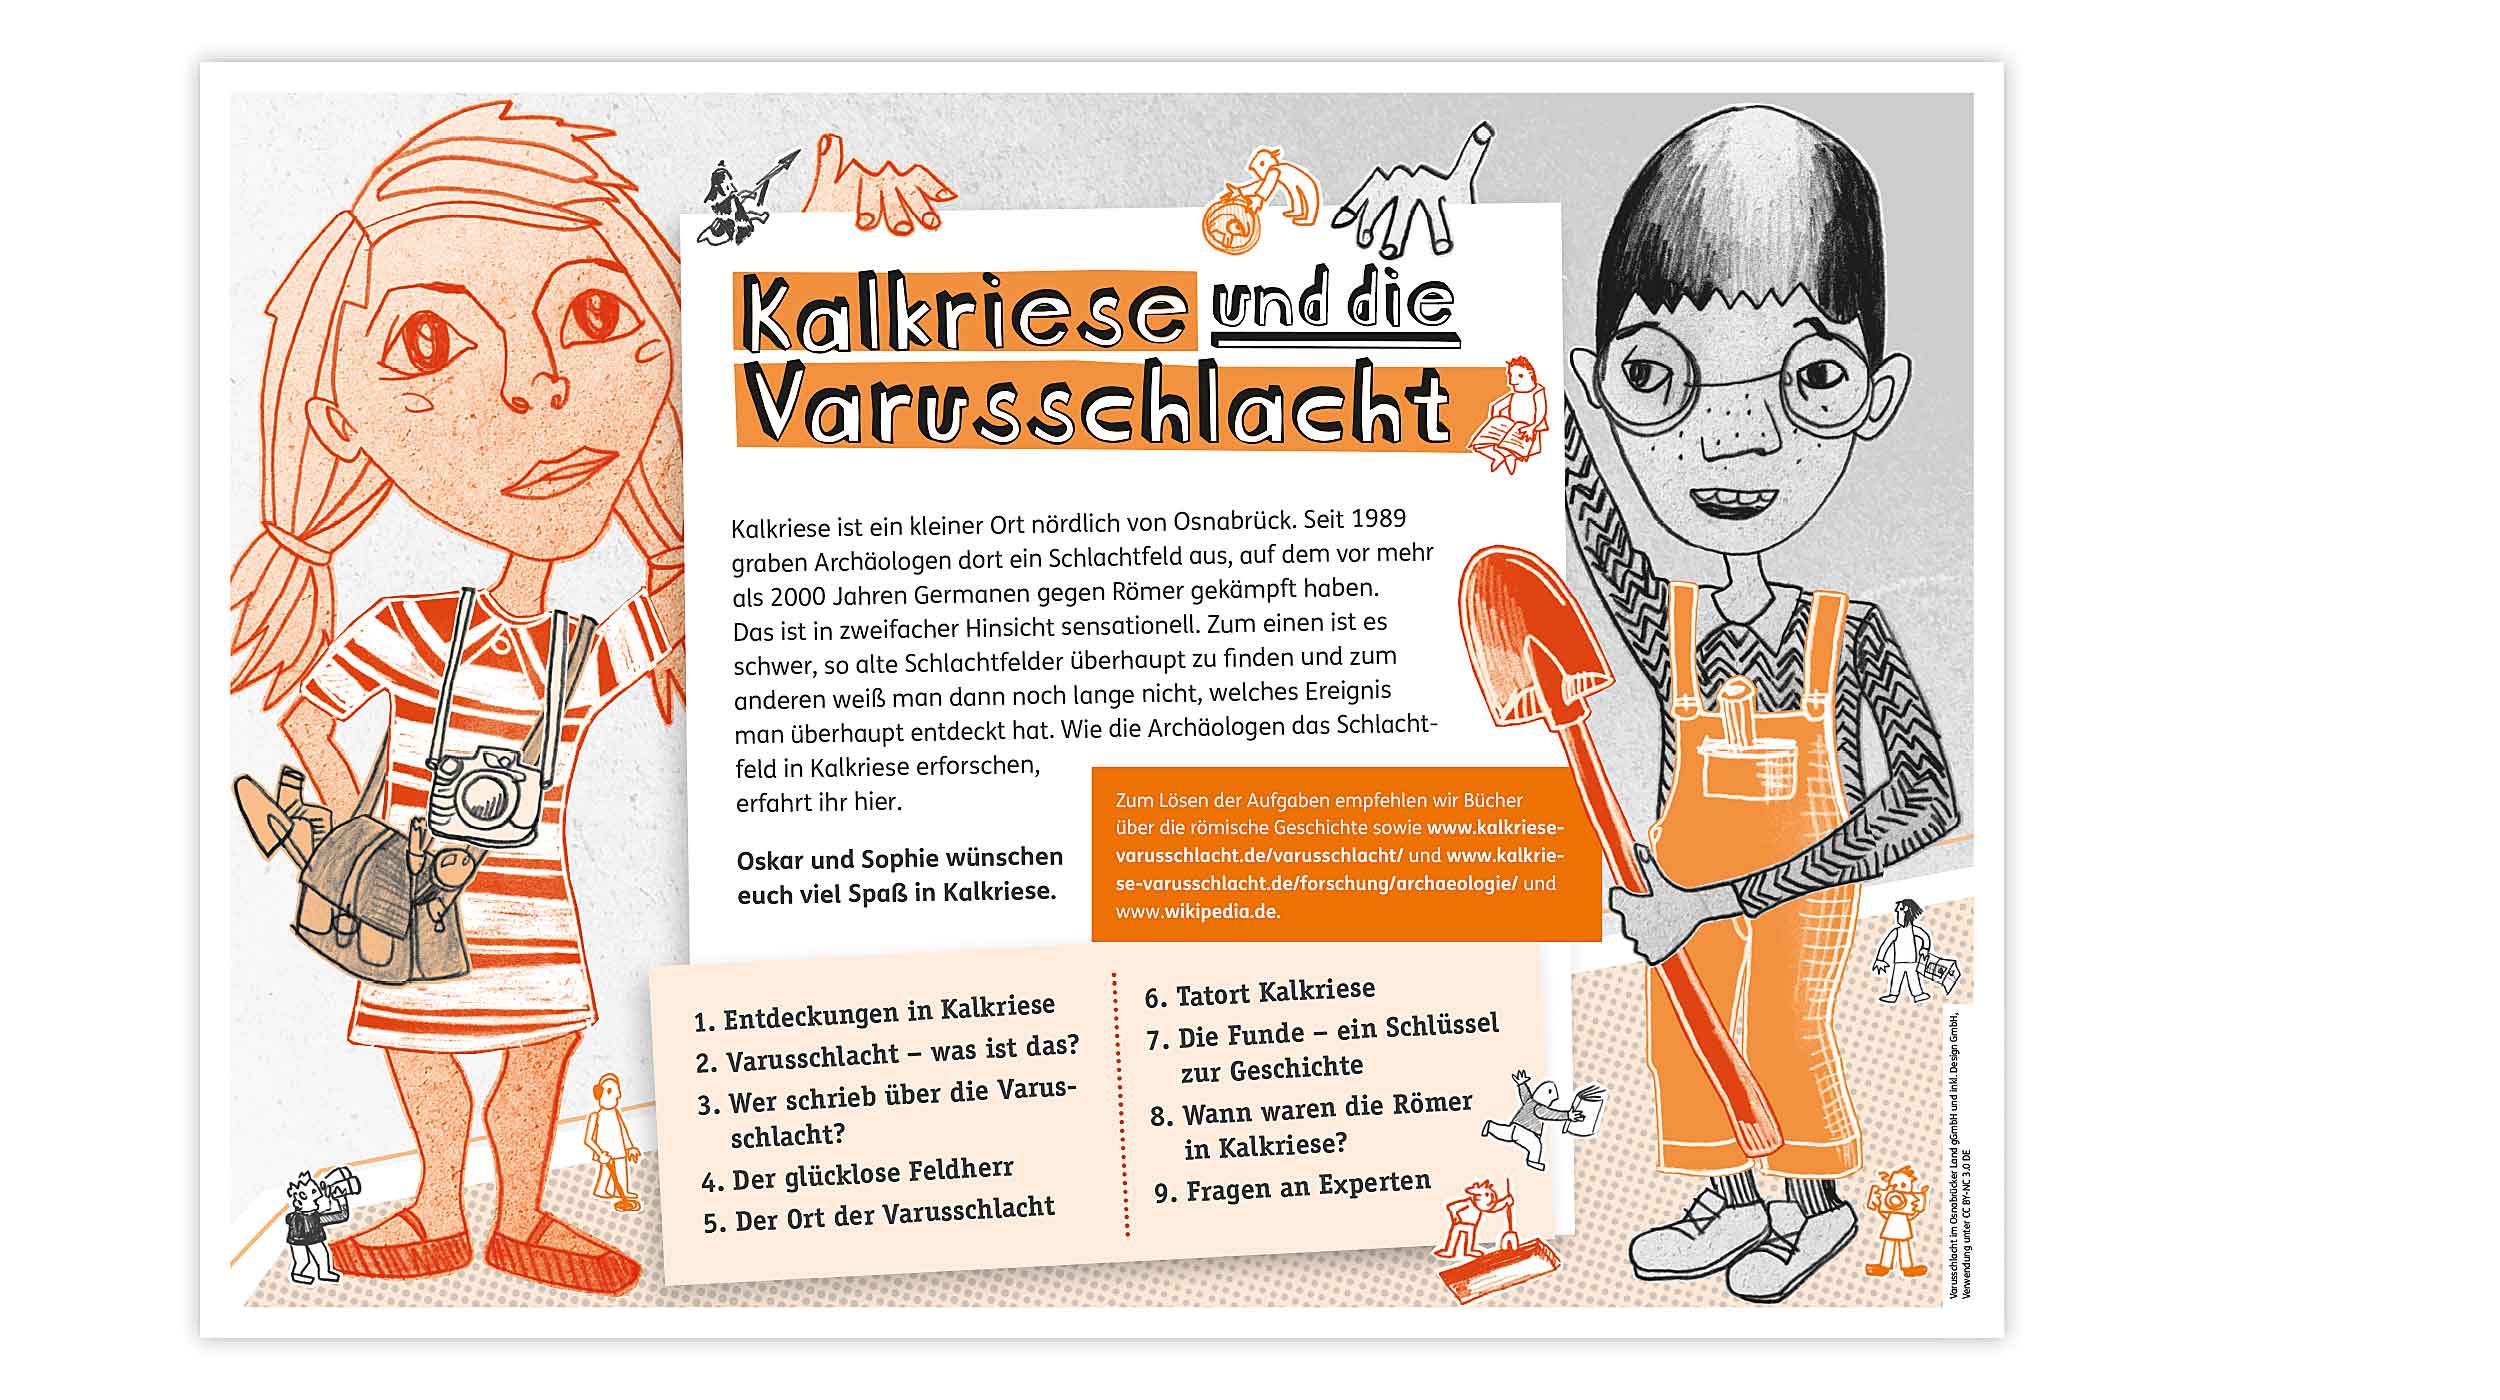 Worksheet on the topic description "Kalkriese and the Varus Battle" with illustration by Oskar and Sophie